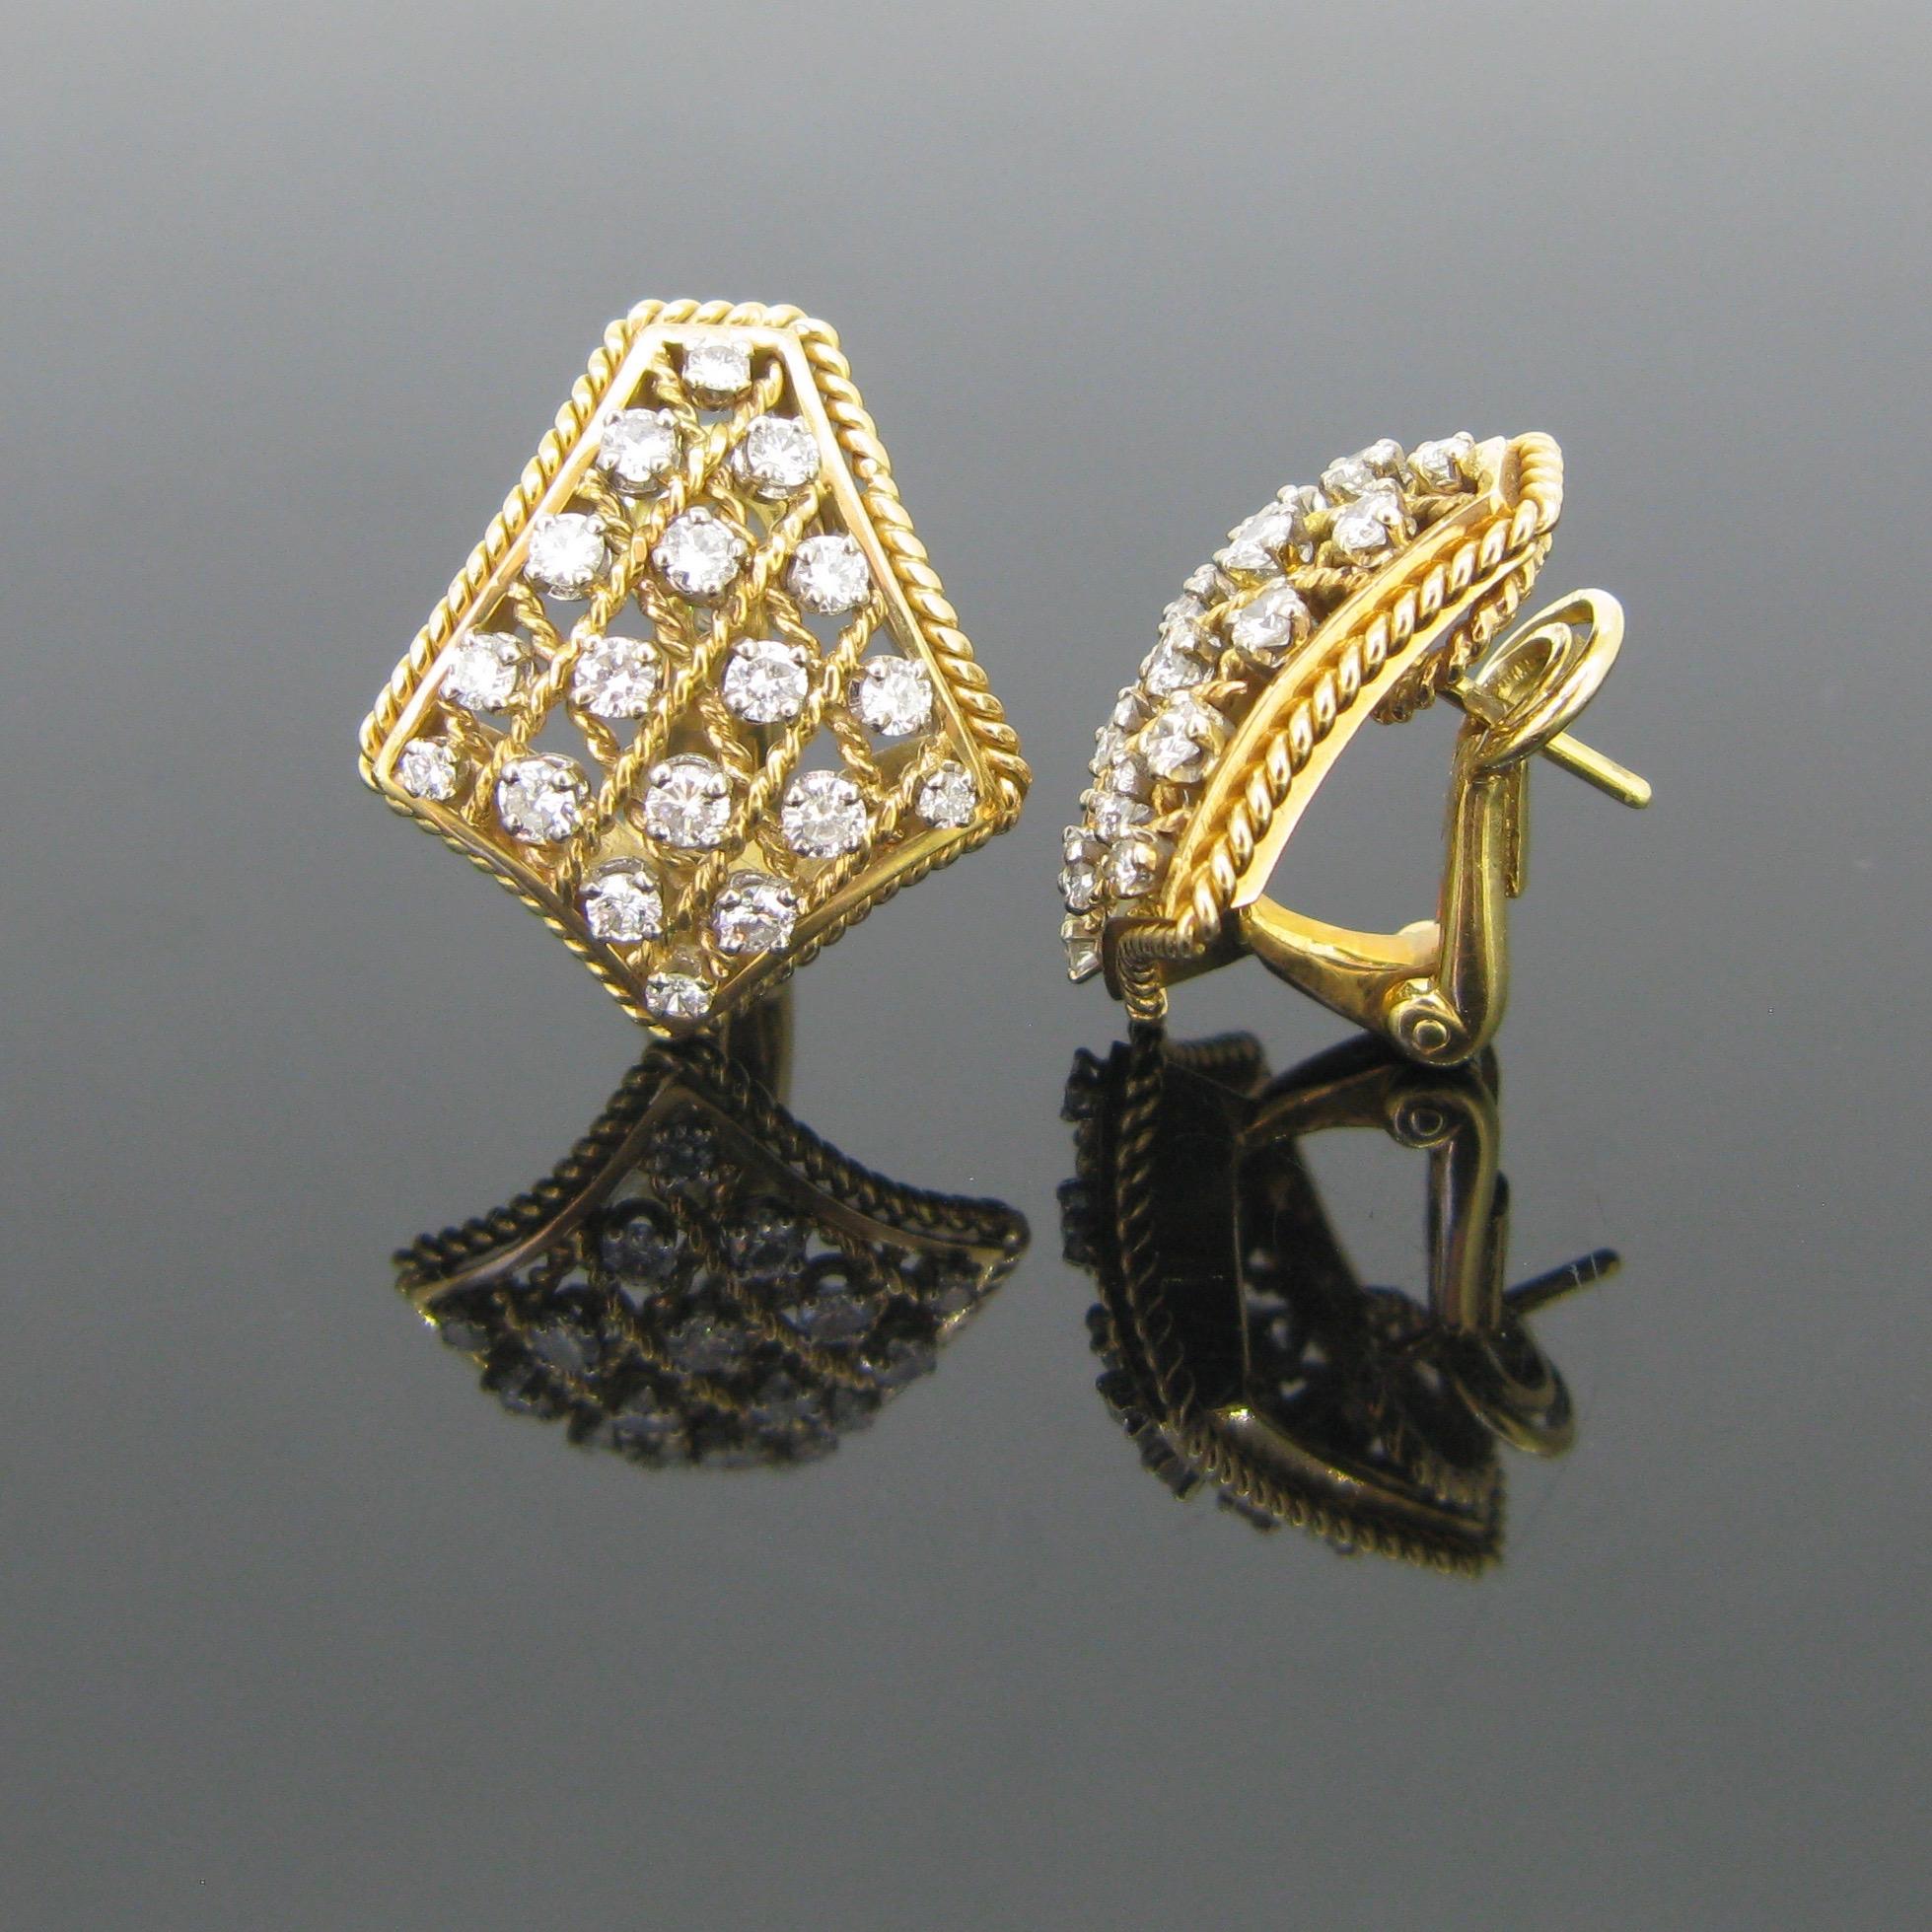 These beautiful earrings are made in 18kt yellow gold and they have a ravishing Retro design. The front is slightly domed and it presents a meshed pattern with twisted wired gold. Each earrings are adorned with 18 brilliant cut diamonds for an